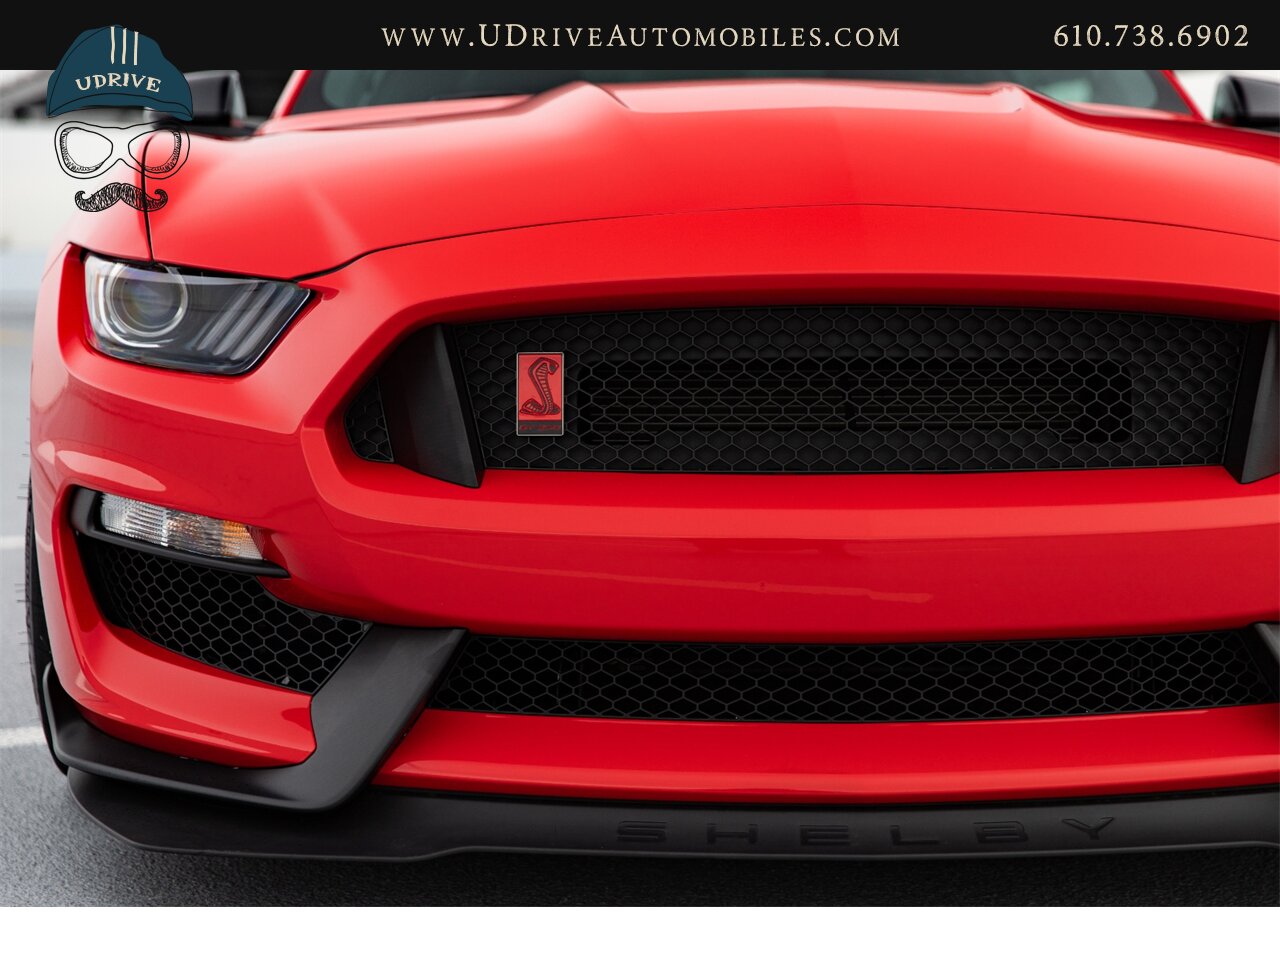 2016 Ford Mustang Shelby GT350R 3k Miles Electronics Pkg  1 of 32 Race Red Produced for USA As New - Photo 14 - West Chester, PA 19382